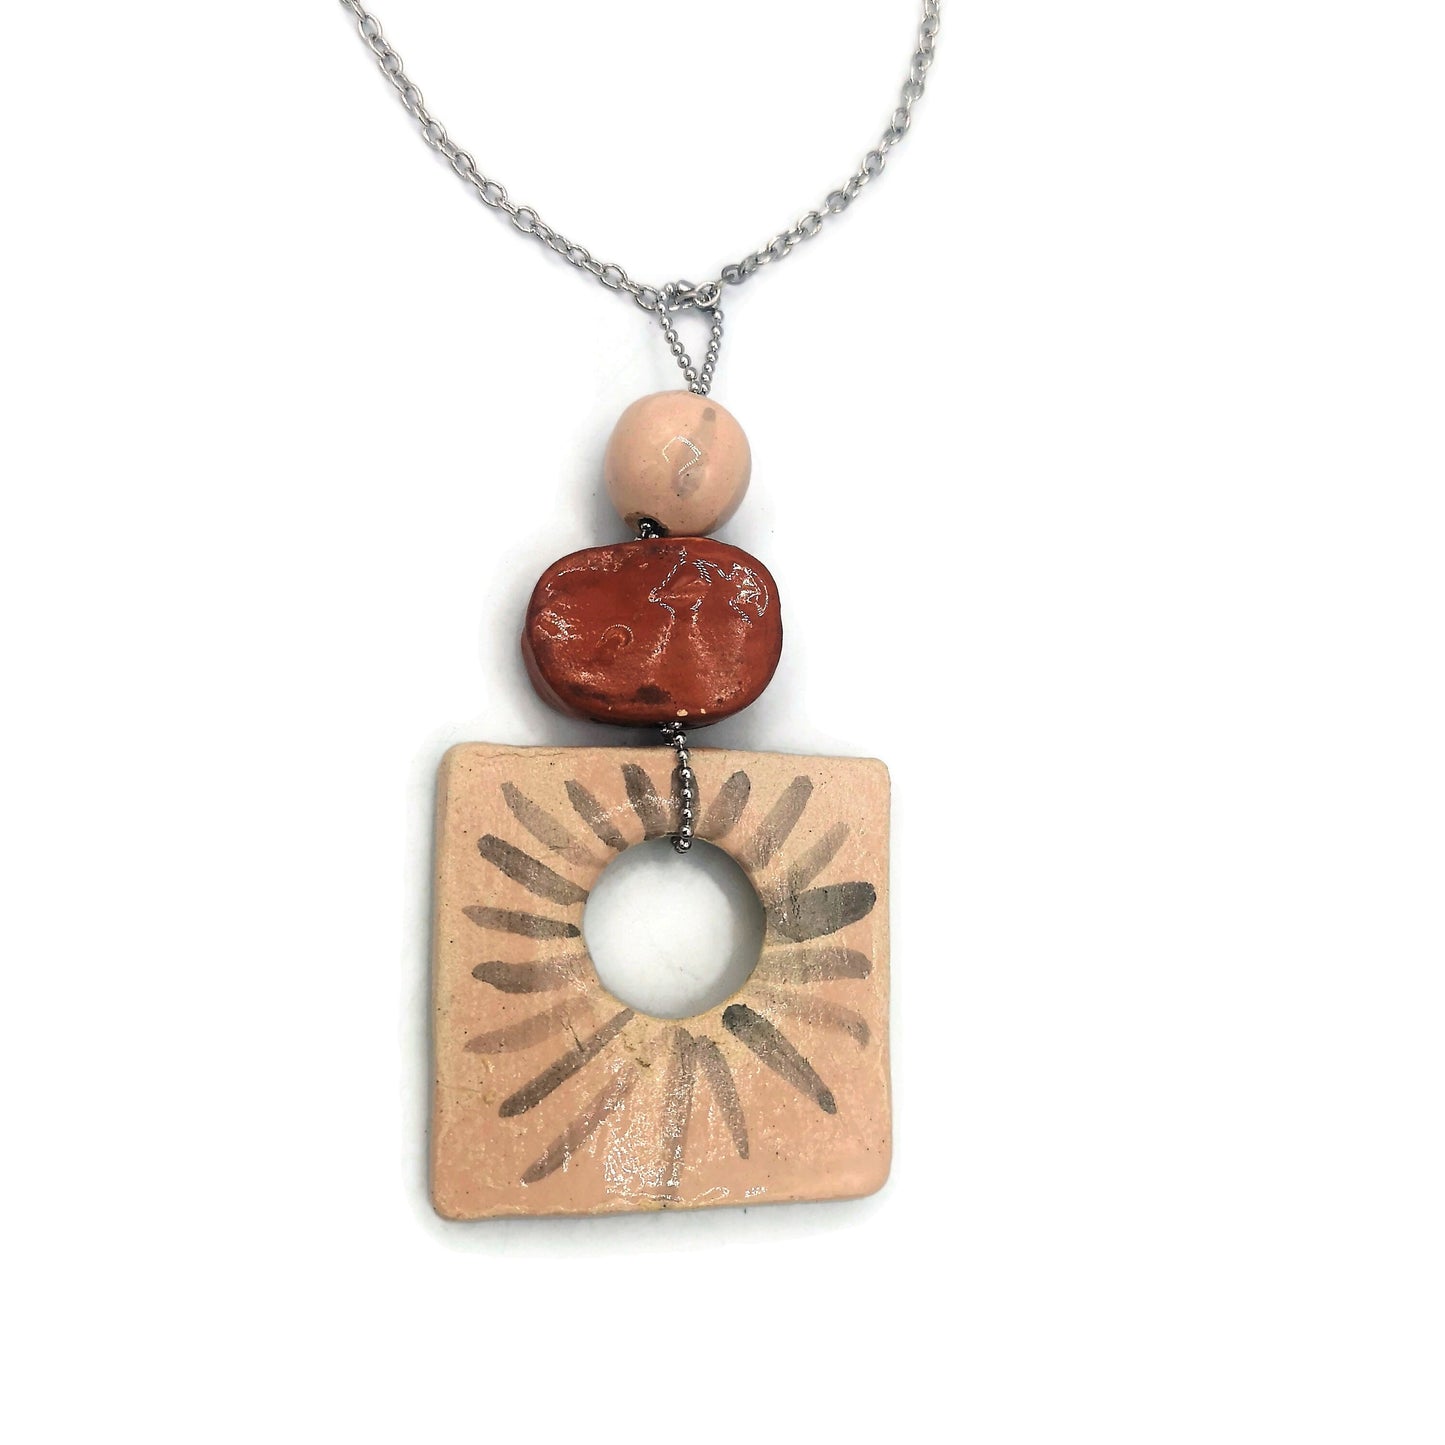 Everyday Necklace Aesthetic, Trendy Statement Pendant Necklace For Women, Best Gifts For Her, Unique Mom Birthday Gift From Son, Best Seller - Ceramica Ana Rafael